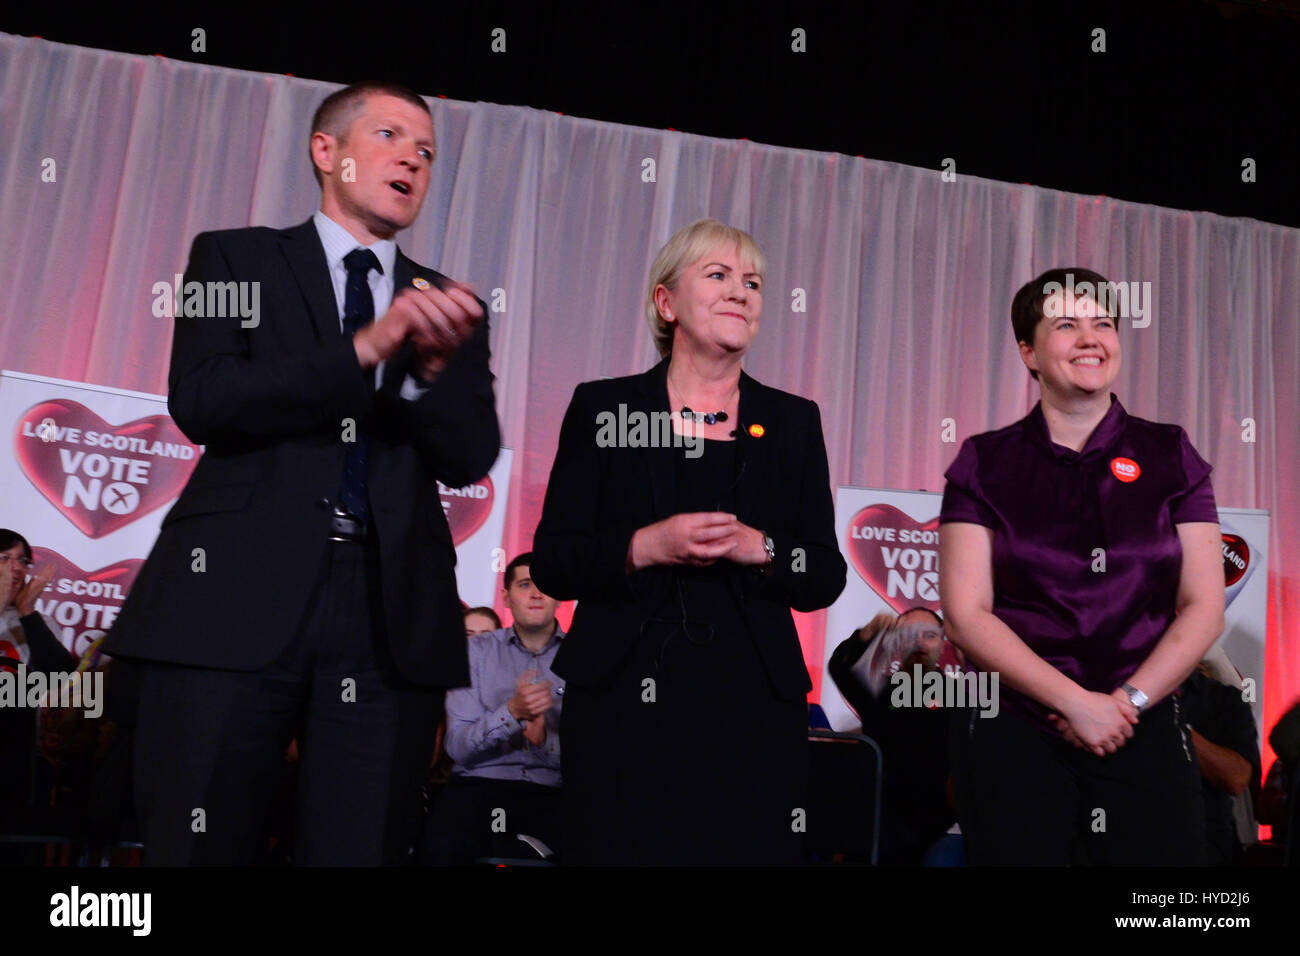 Leaders of the Scottish pro-union parties at a Better Together campaign rally in Glasgow (L to R Willie Rennie, Liberal Democrats; Johann Lamont, Labour; Ruth Davidson, Conservative) Stock Photo